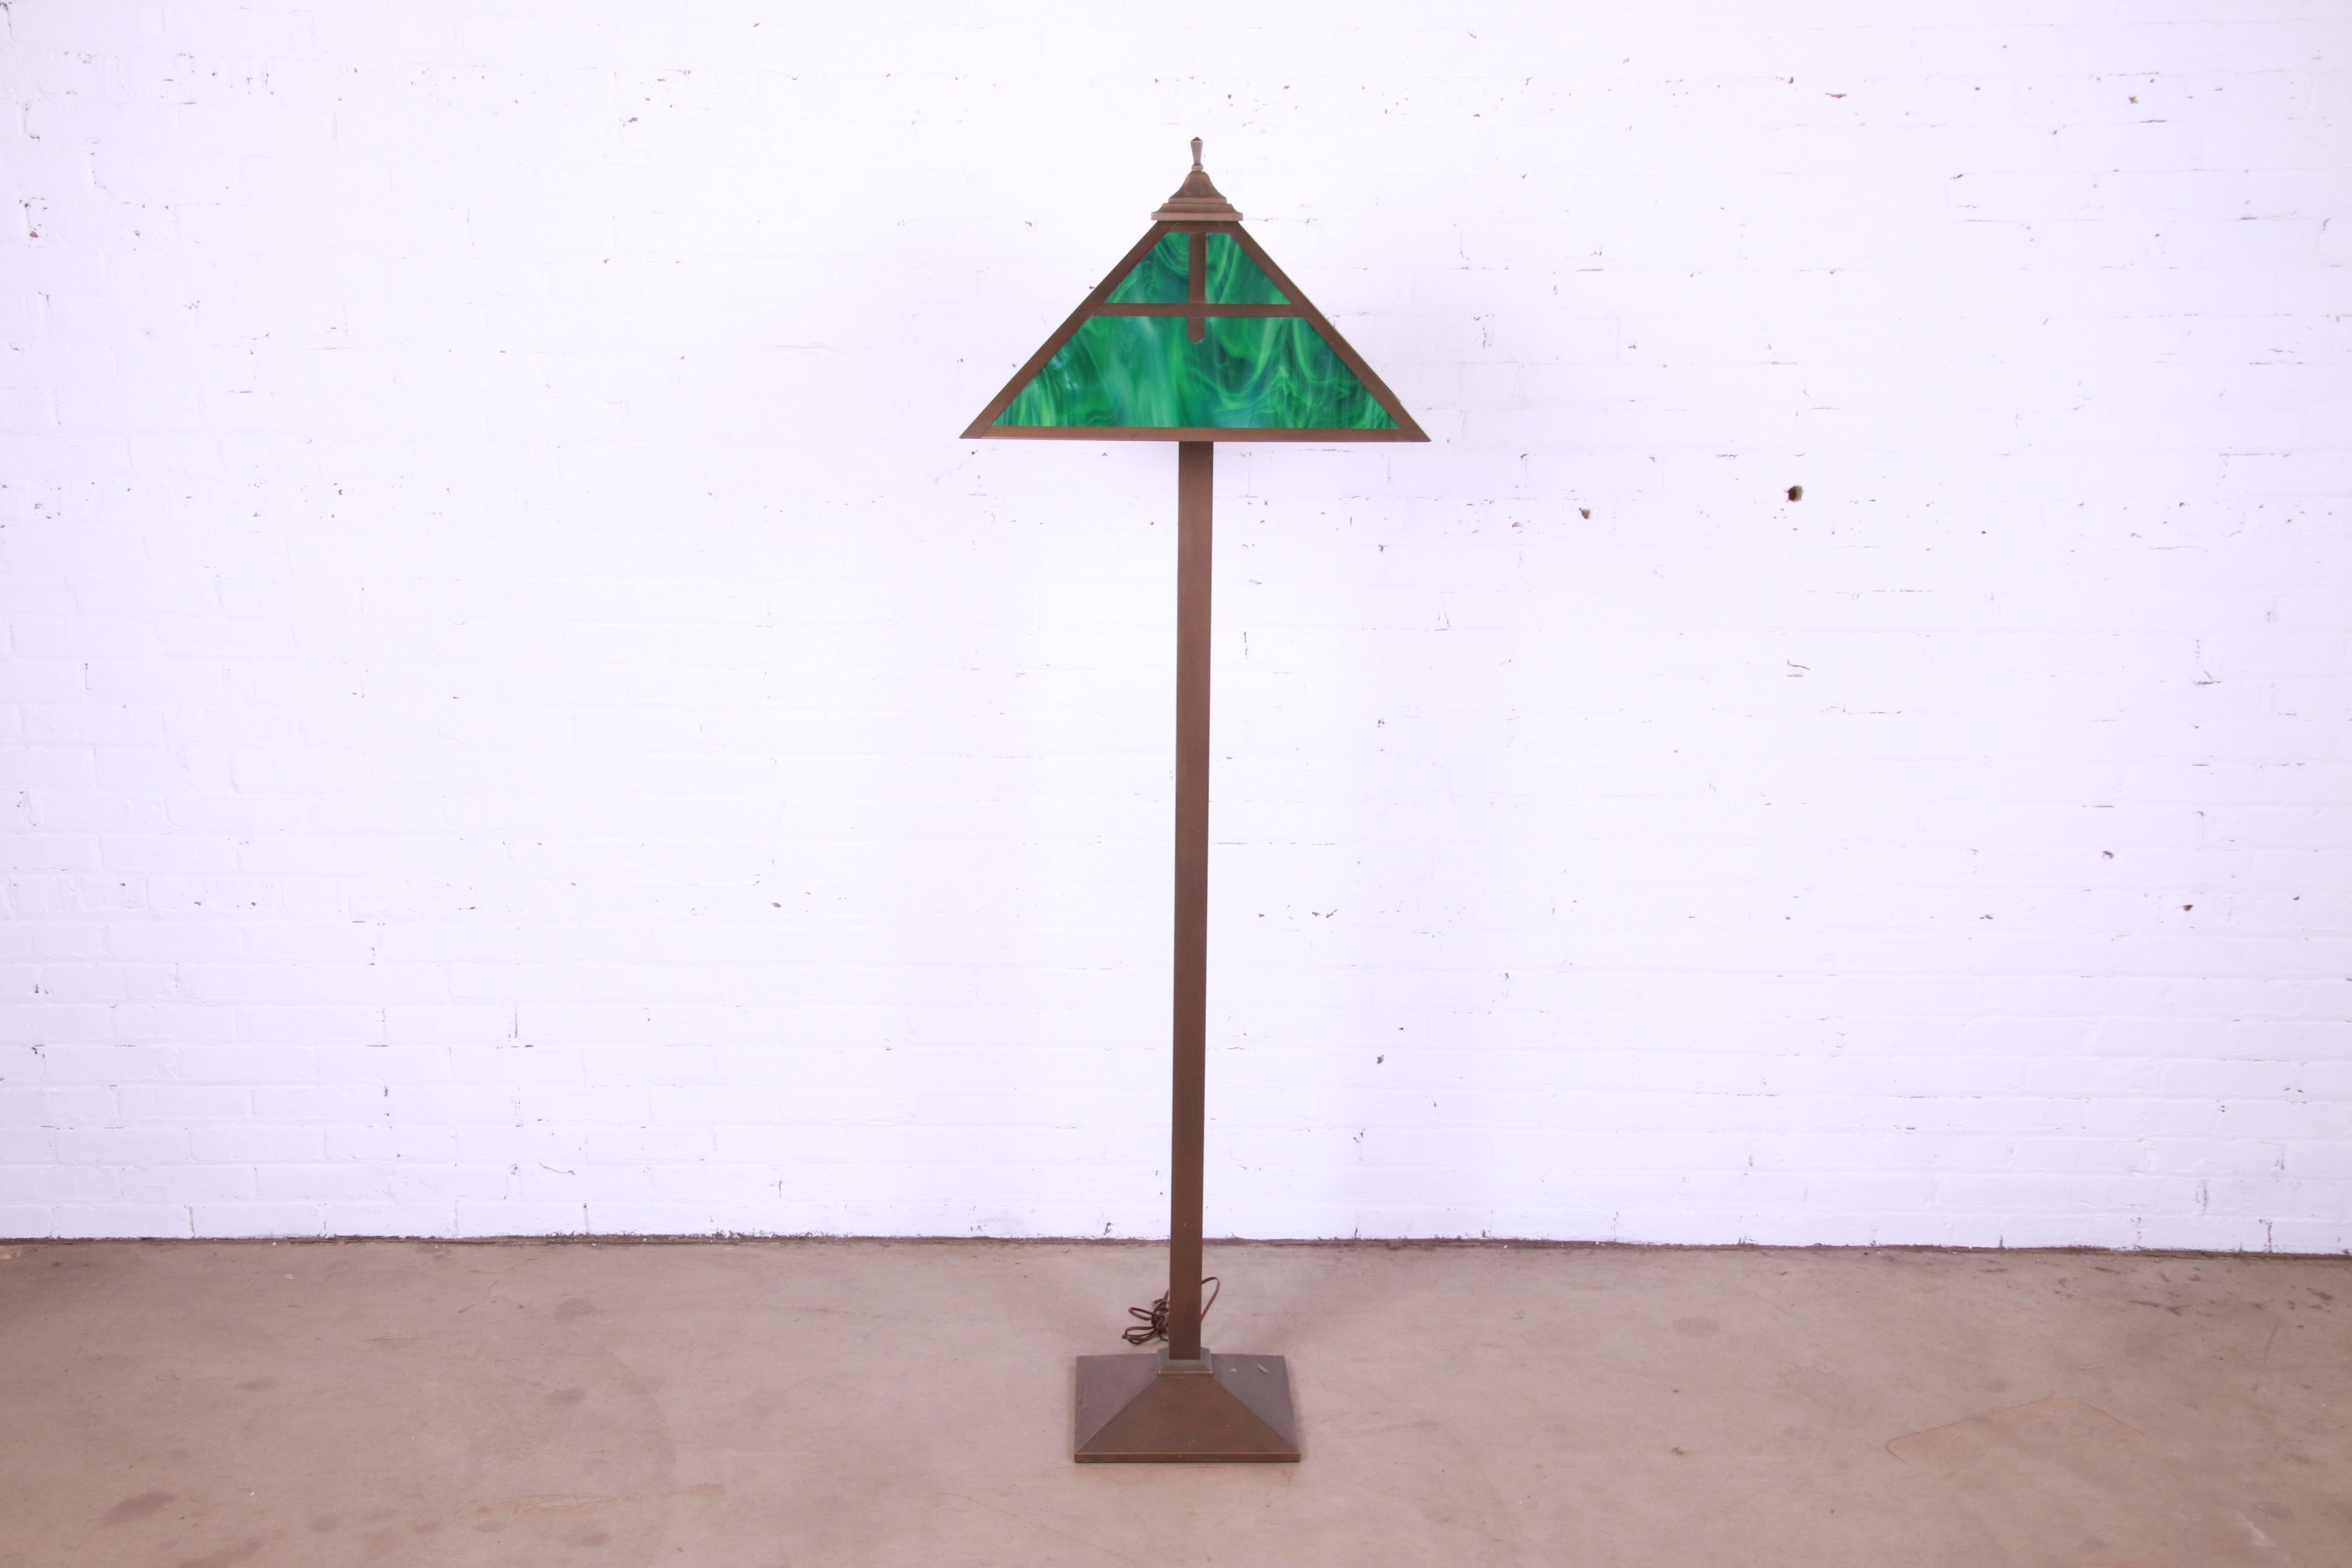 A beautiful Arts & Crafts style floor lamp

Recently procured from Frank Lloyd Wright's DeRhodes House

USA, late 20th century

Copper, with green slag glass shade.

Measures: 22